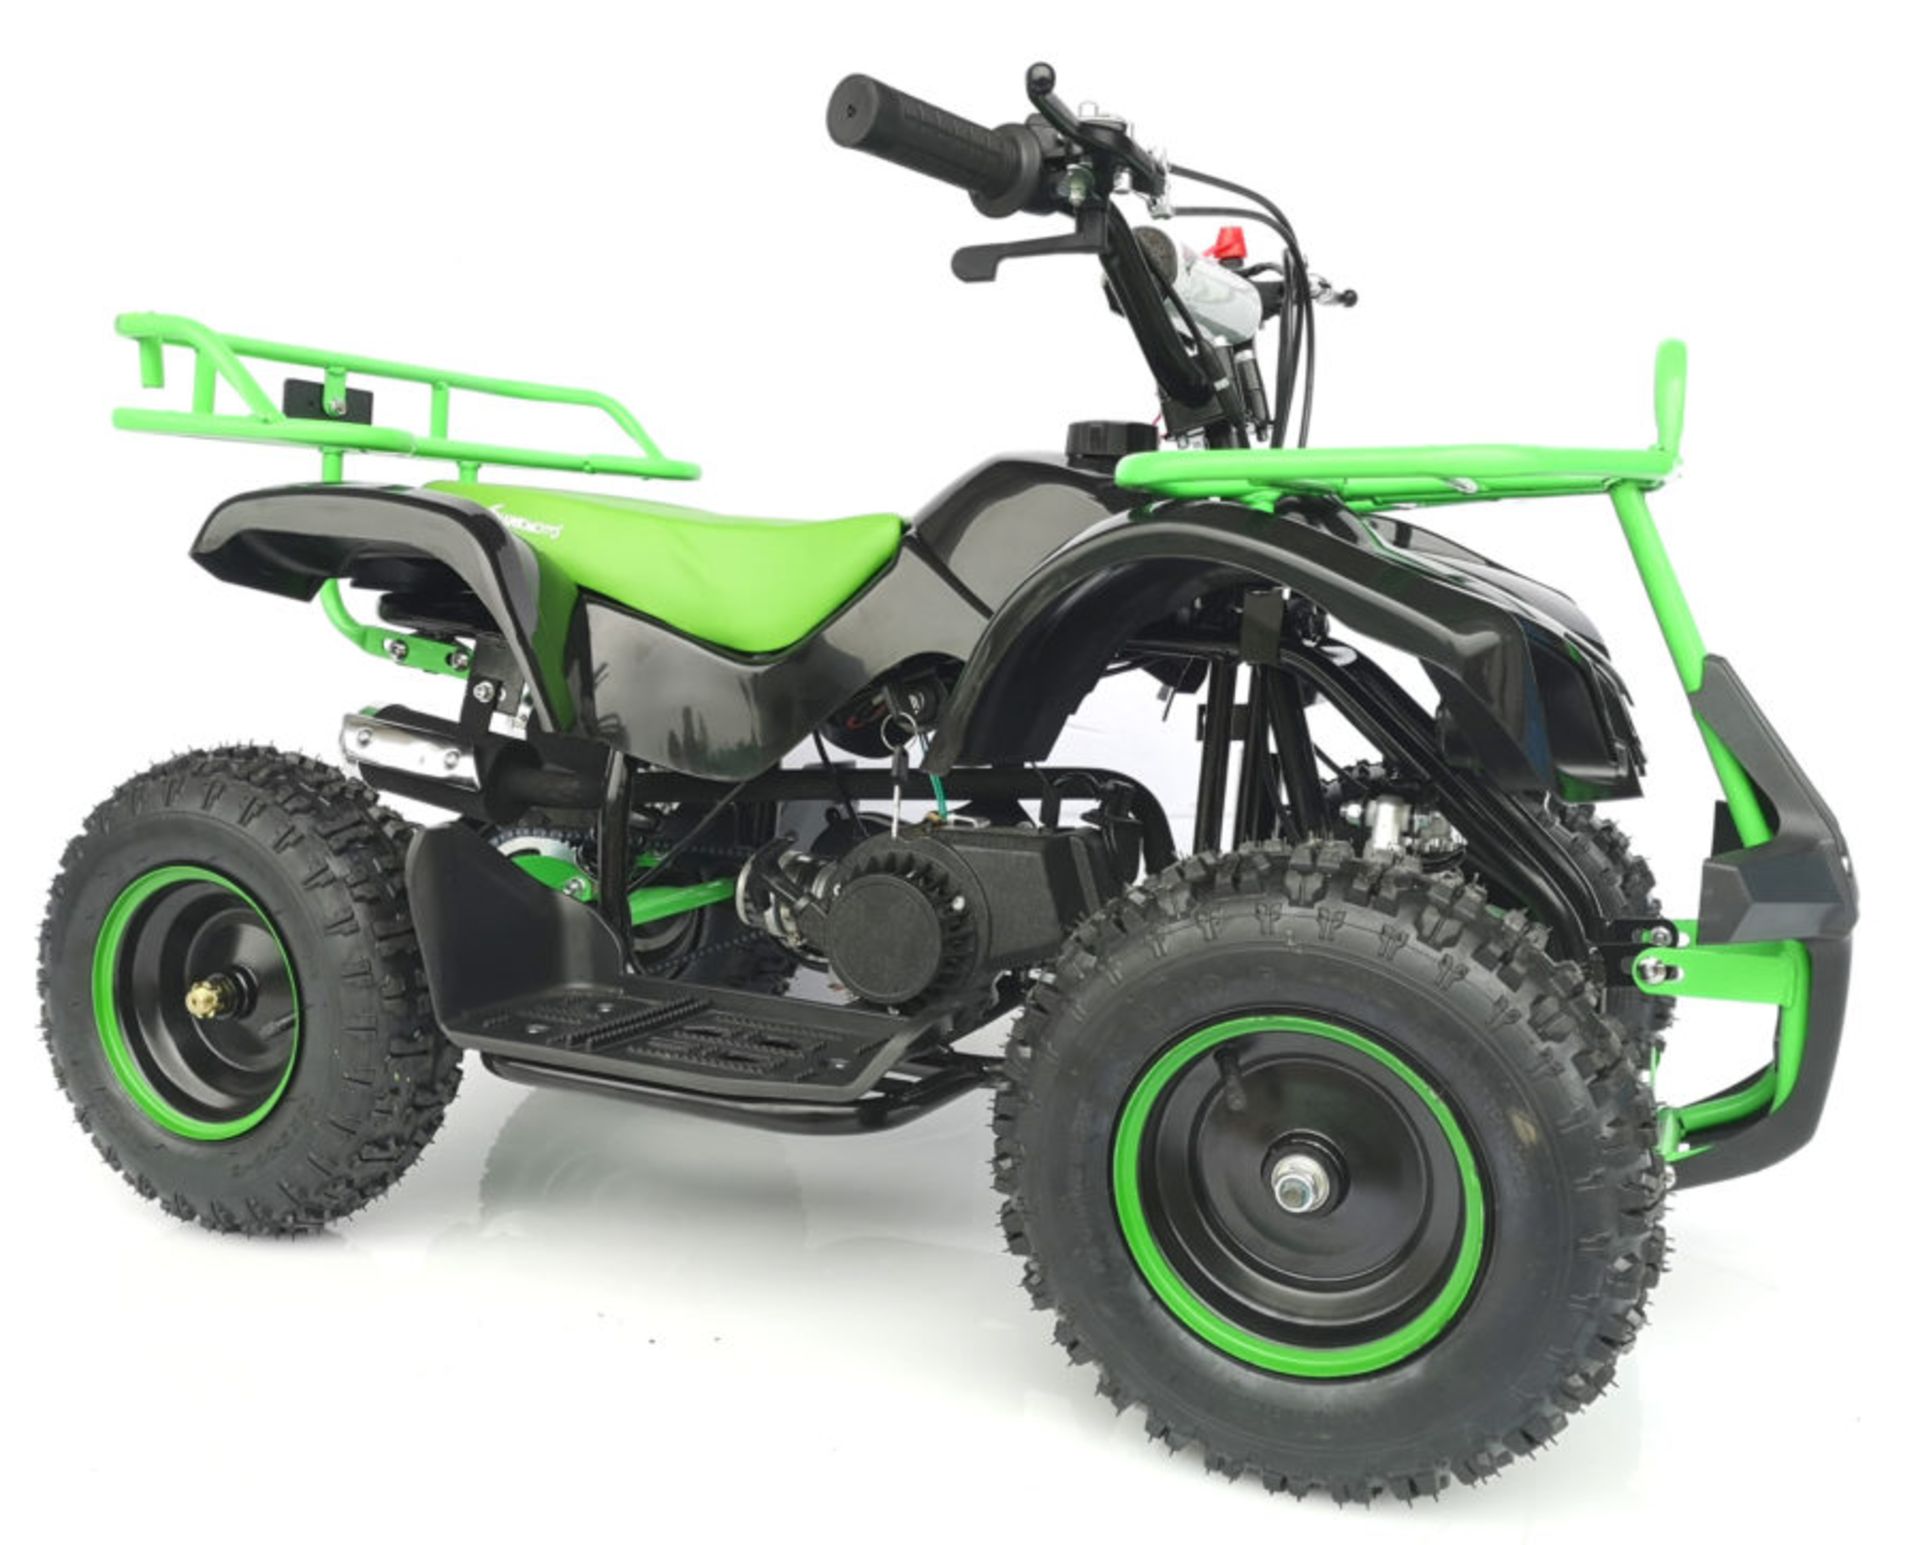 + VAT Brand New 50cc Mini Quad Bike FRM - Colours May Vary - Picture May Vary From Actual Item - Image 2 of 9